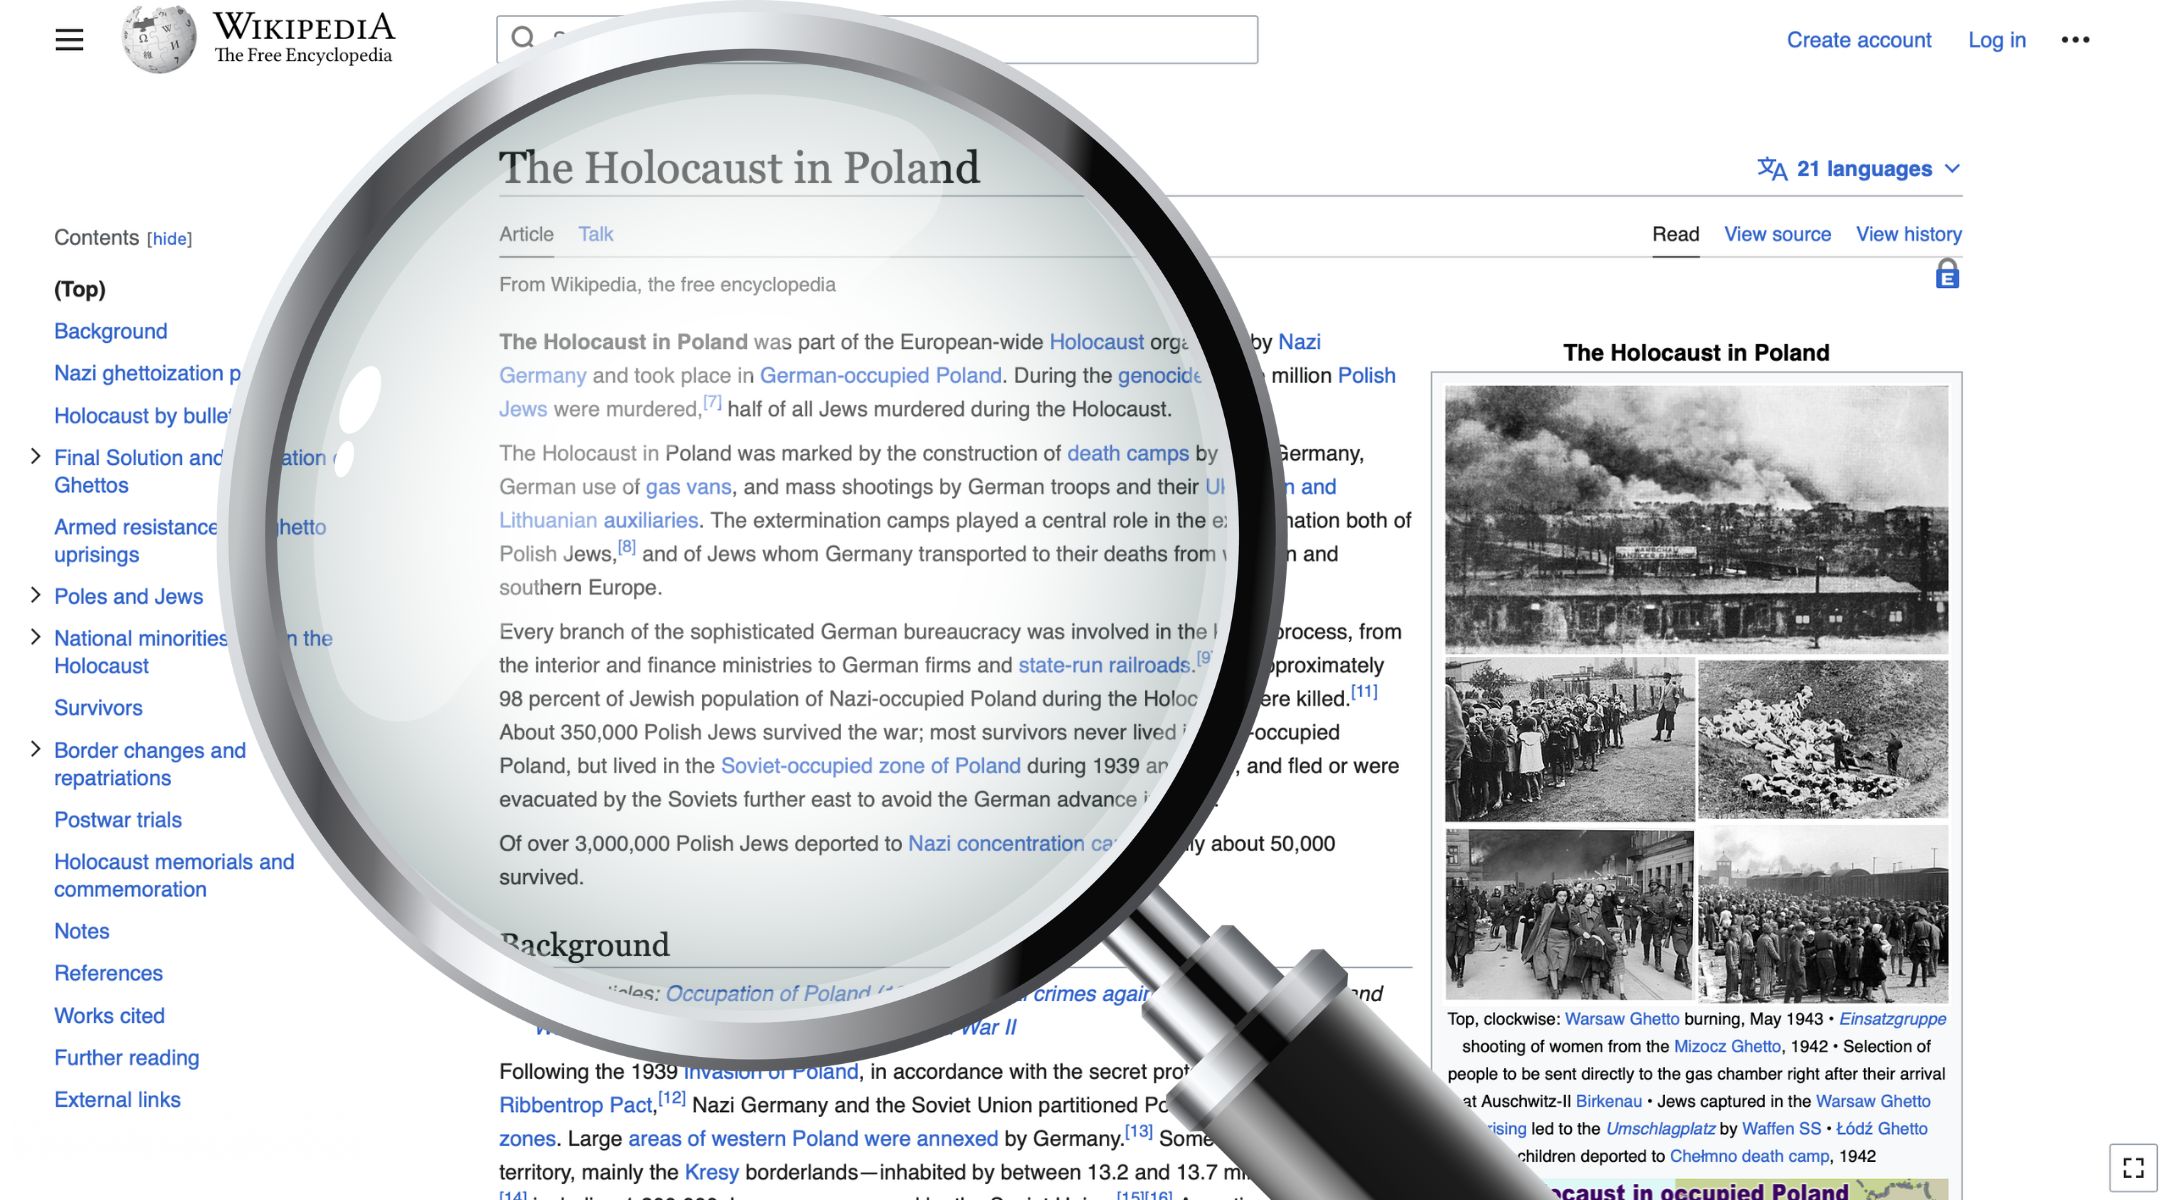 An academic paper found that a dedicated group has for some 15 years manipulated Wikipedia in ways that lay blame for the Holocaust on Jews and absolve Poland of almost any responsibility for its record of antisemitism. (JTA illustration)